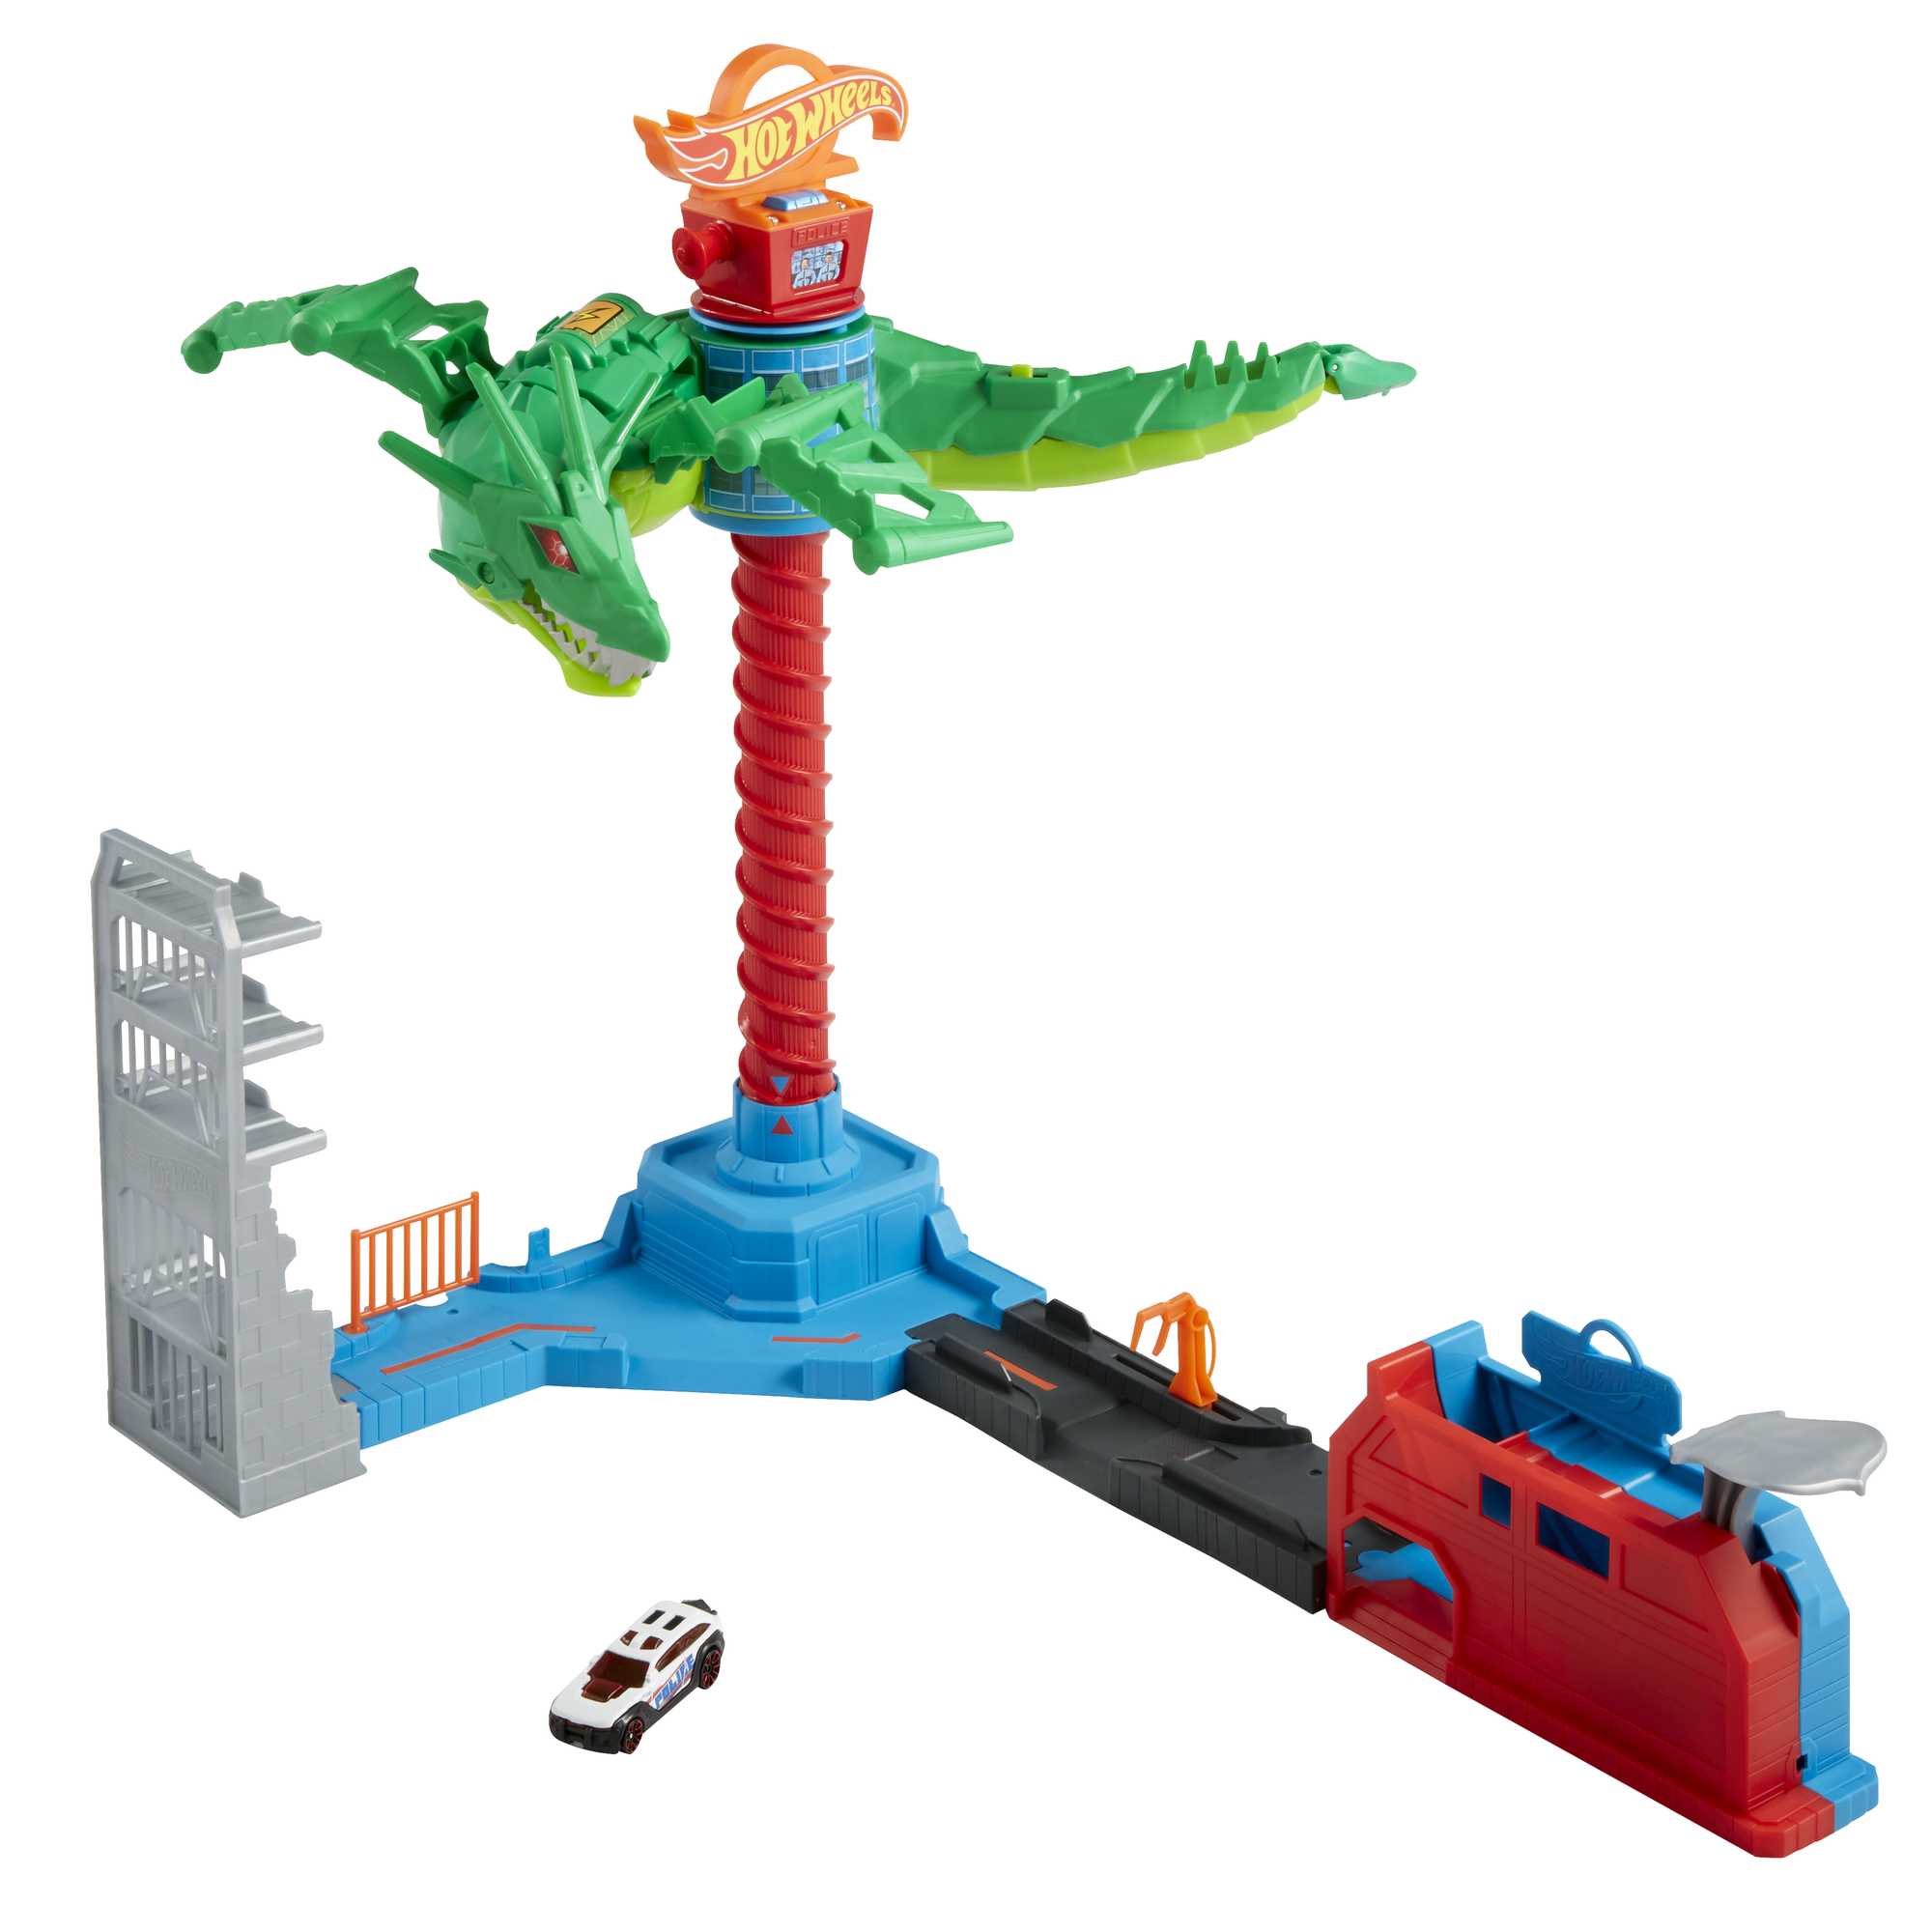  Hot Wheels Dragon Blast Play Set with Launcher for Heroic  Action : Toys & Games